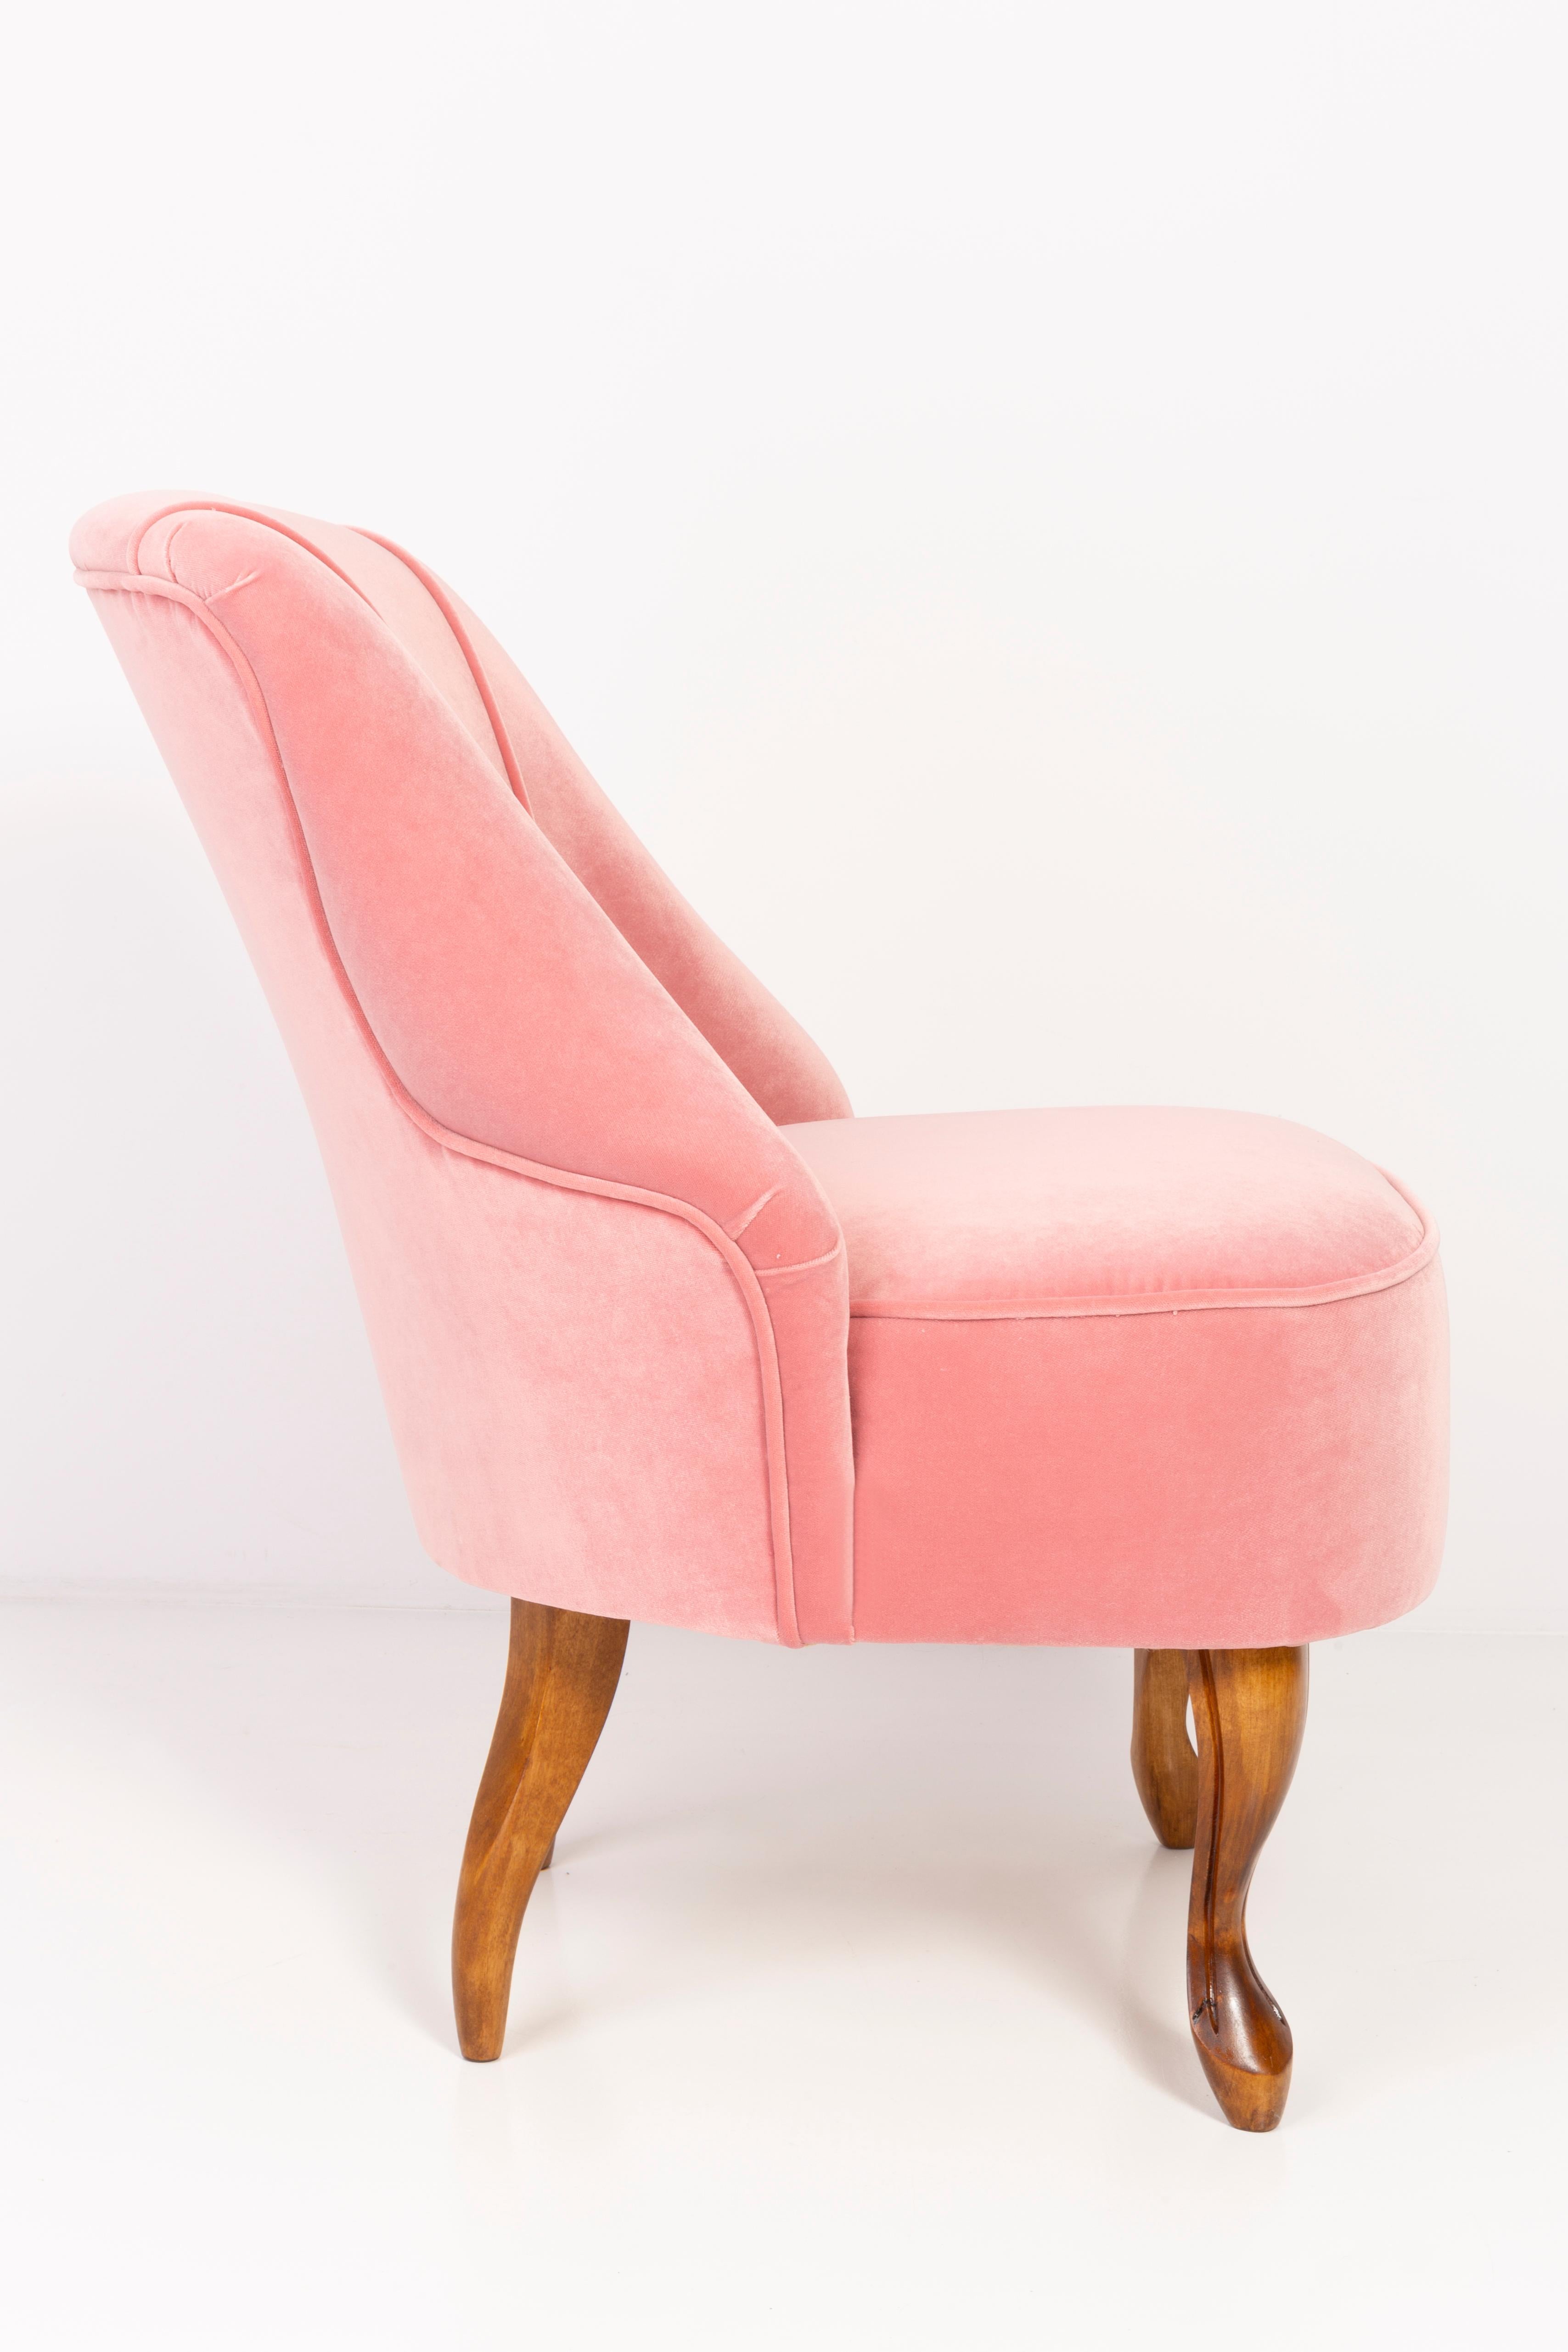 Set of Four 20th Century Art Deco Baby Pink Armchairs, 1950s In Excellent Condition For Sale In 05-080 Hornowek, PL